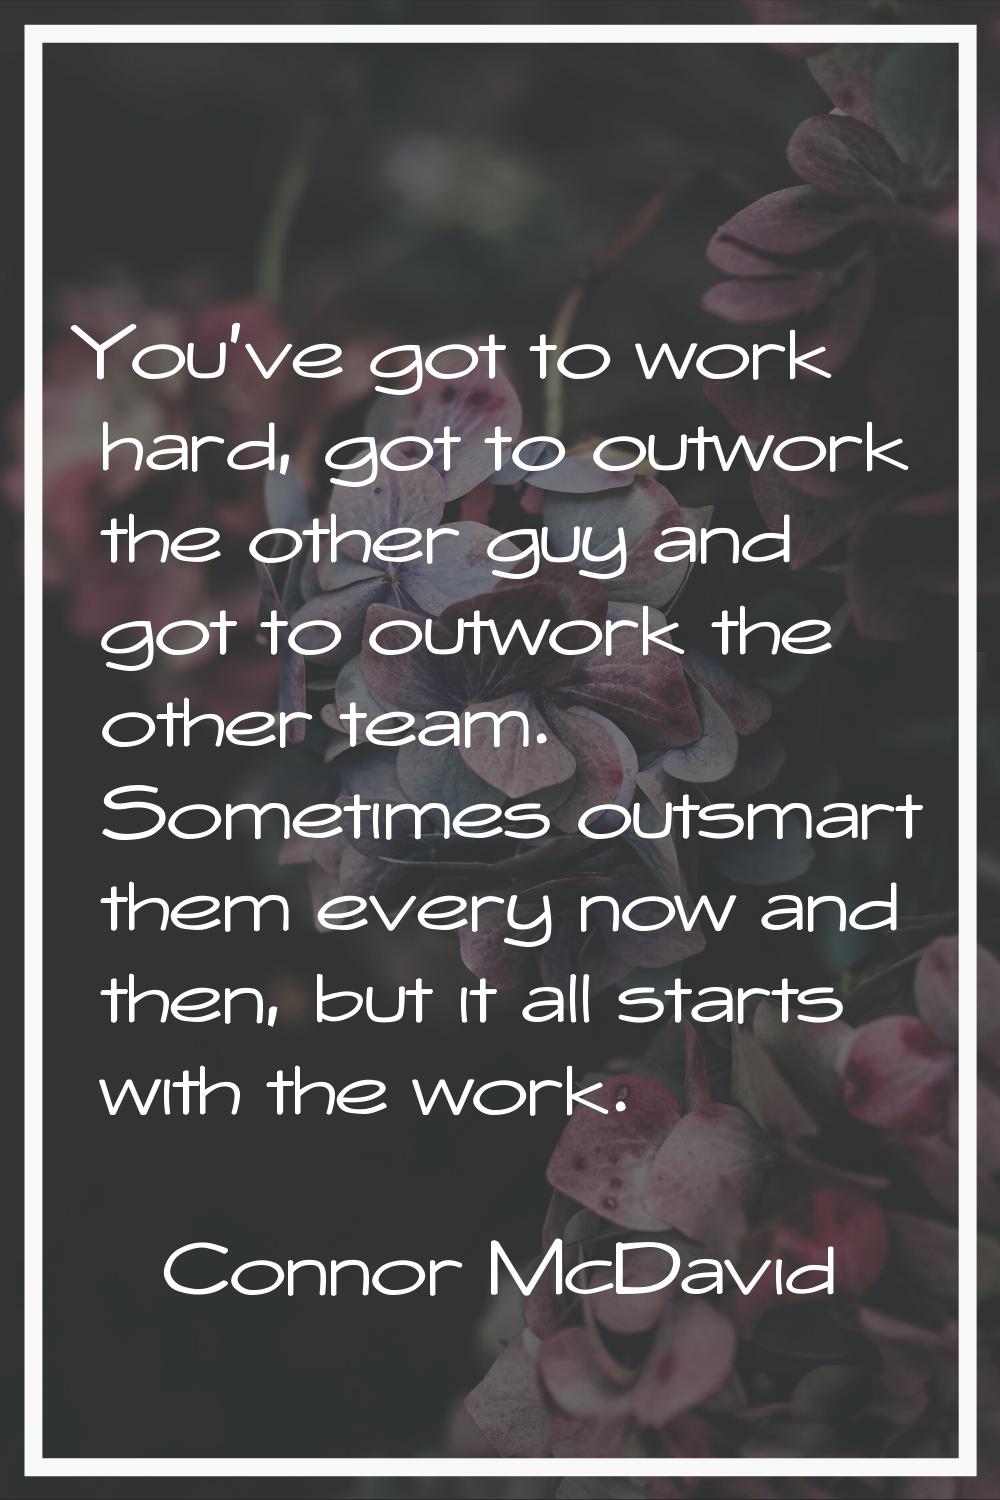 You've got to work hard, got to outwork the other guy and got to outwork the other team. Sometimes 